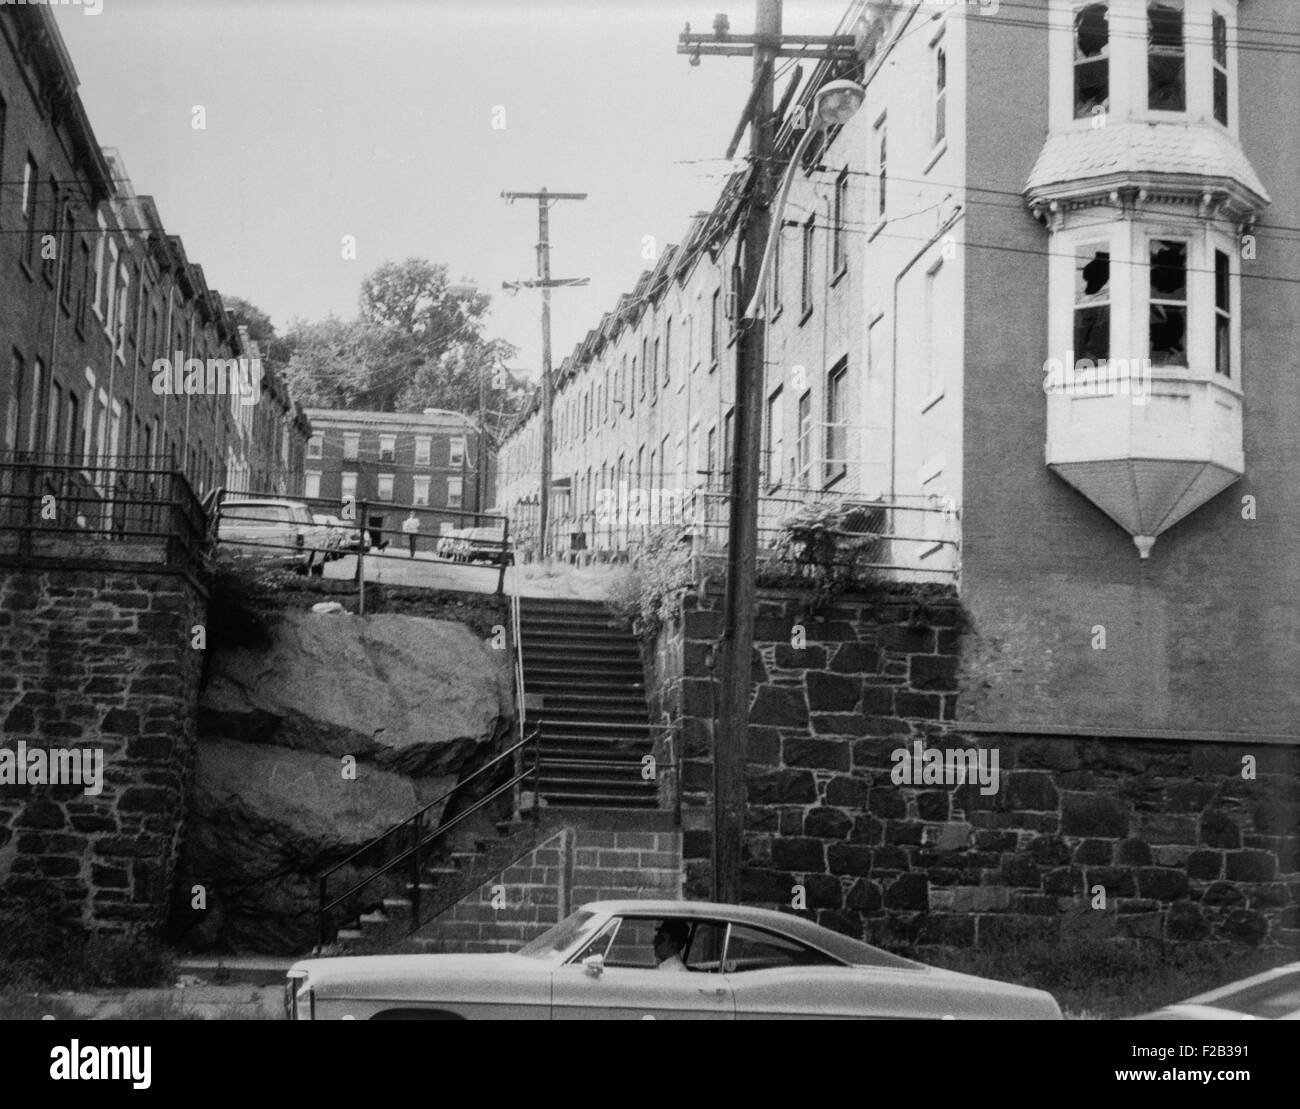 Yonkers, New York, ca. 1980. Moquette Row Housing, are 18th century industrial housing built for workers of Moquette Textile Mills in the 1880's. View west showing front elevation and original end structures. Westchester County, NY. (BSLOC 2015 11 10) Stock Photo